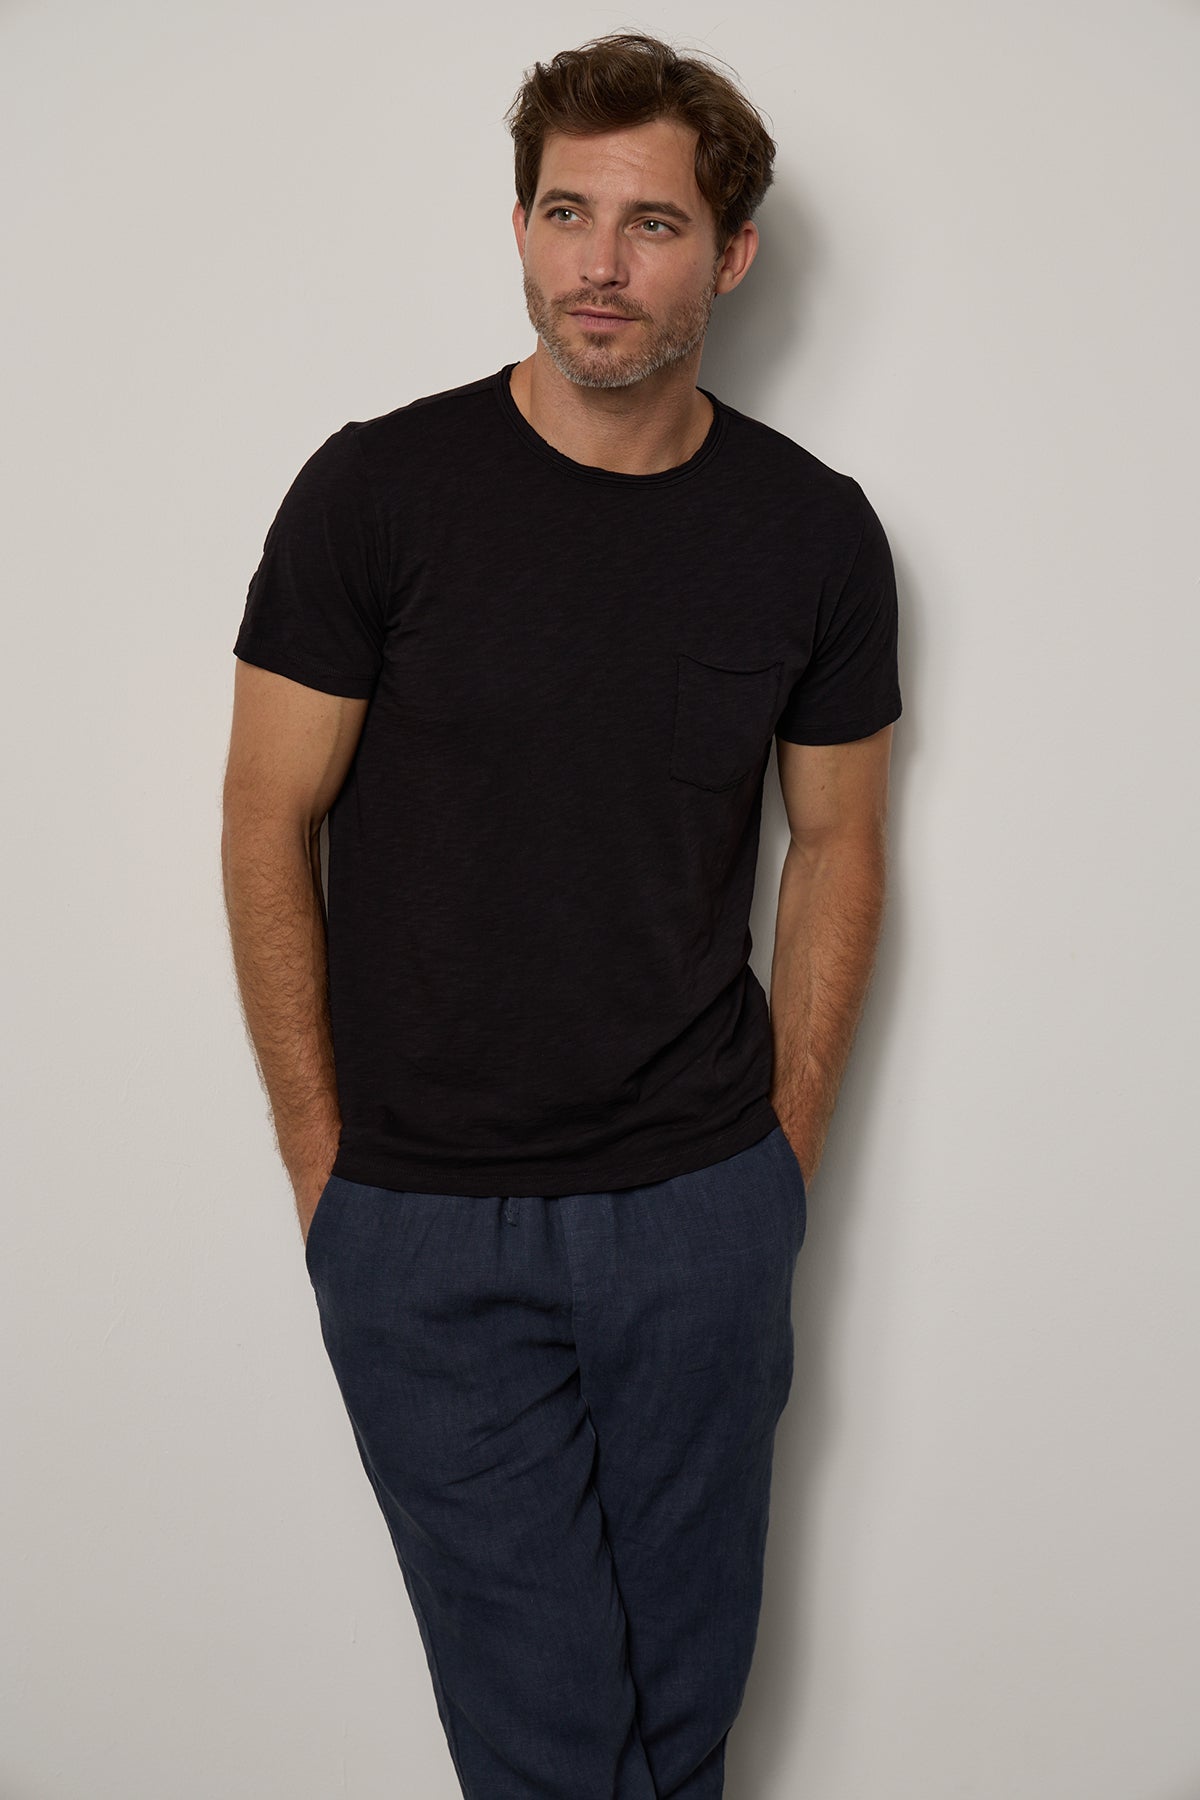   Man in a black textured cotton slub CHAD TEE by Velvet by Graham & Spencer and navy pants standing against a neutral background, looking to his left with a subtle smile. 